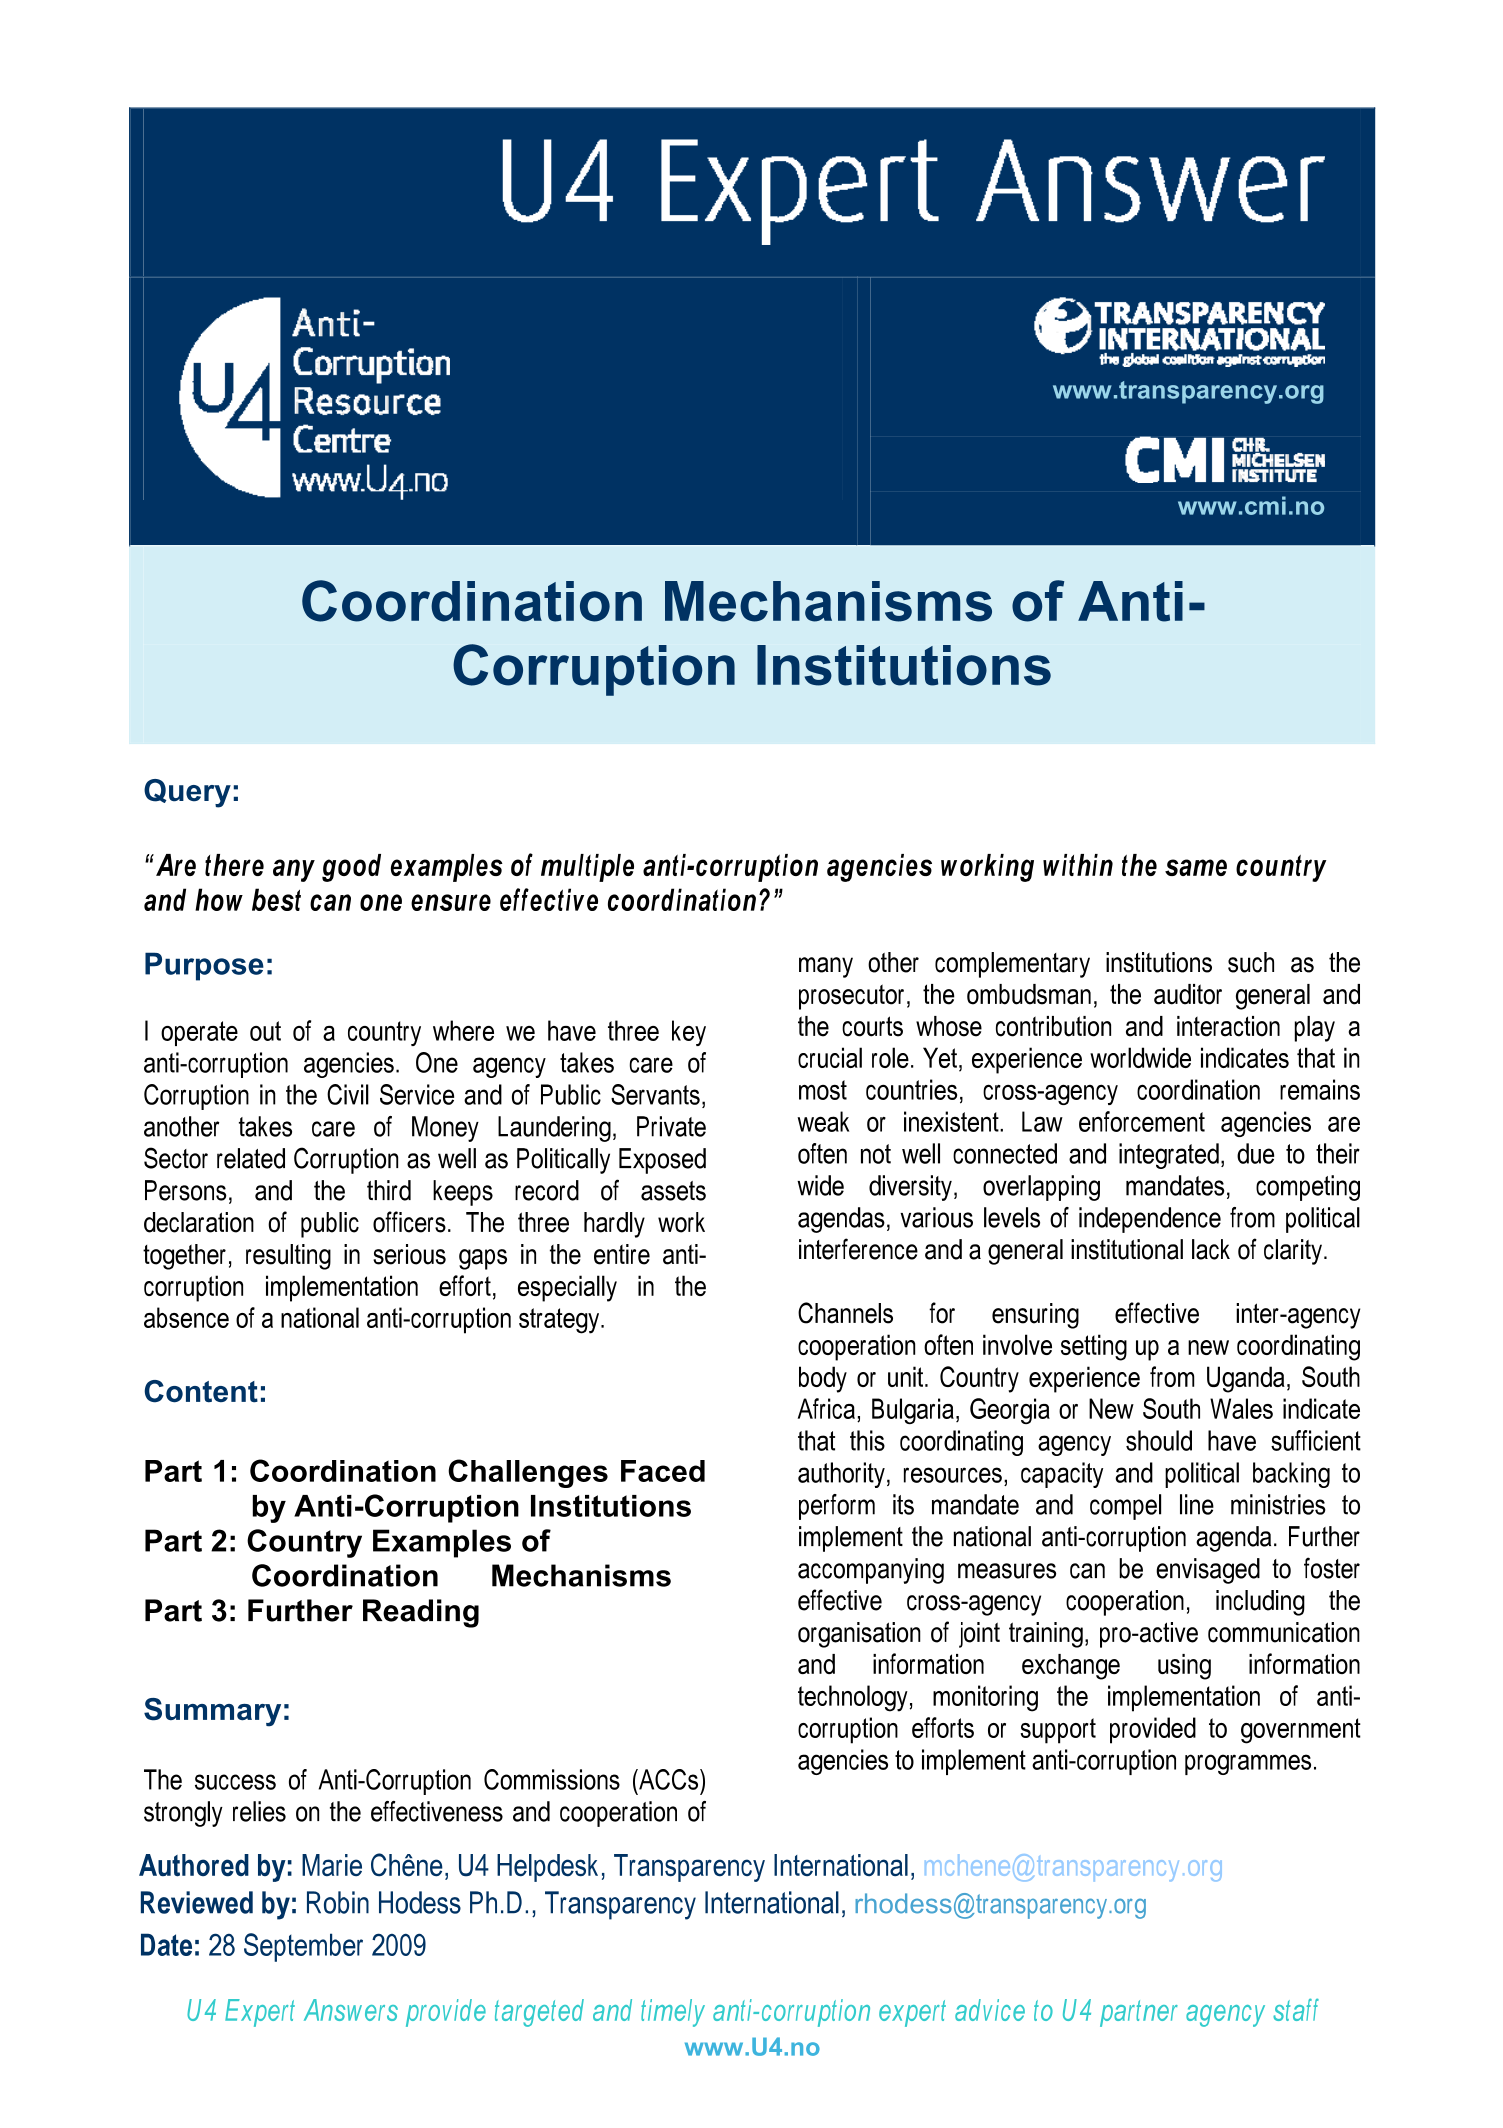 Coordination mechanisms of anti-corruption institutions